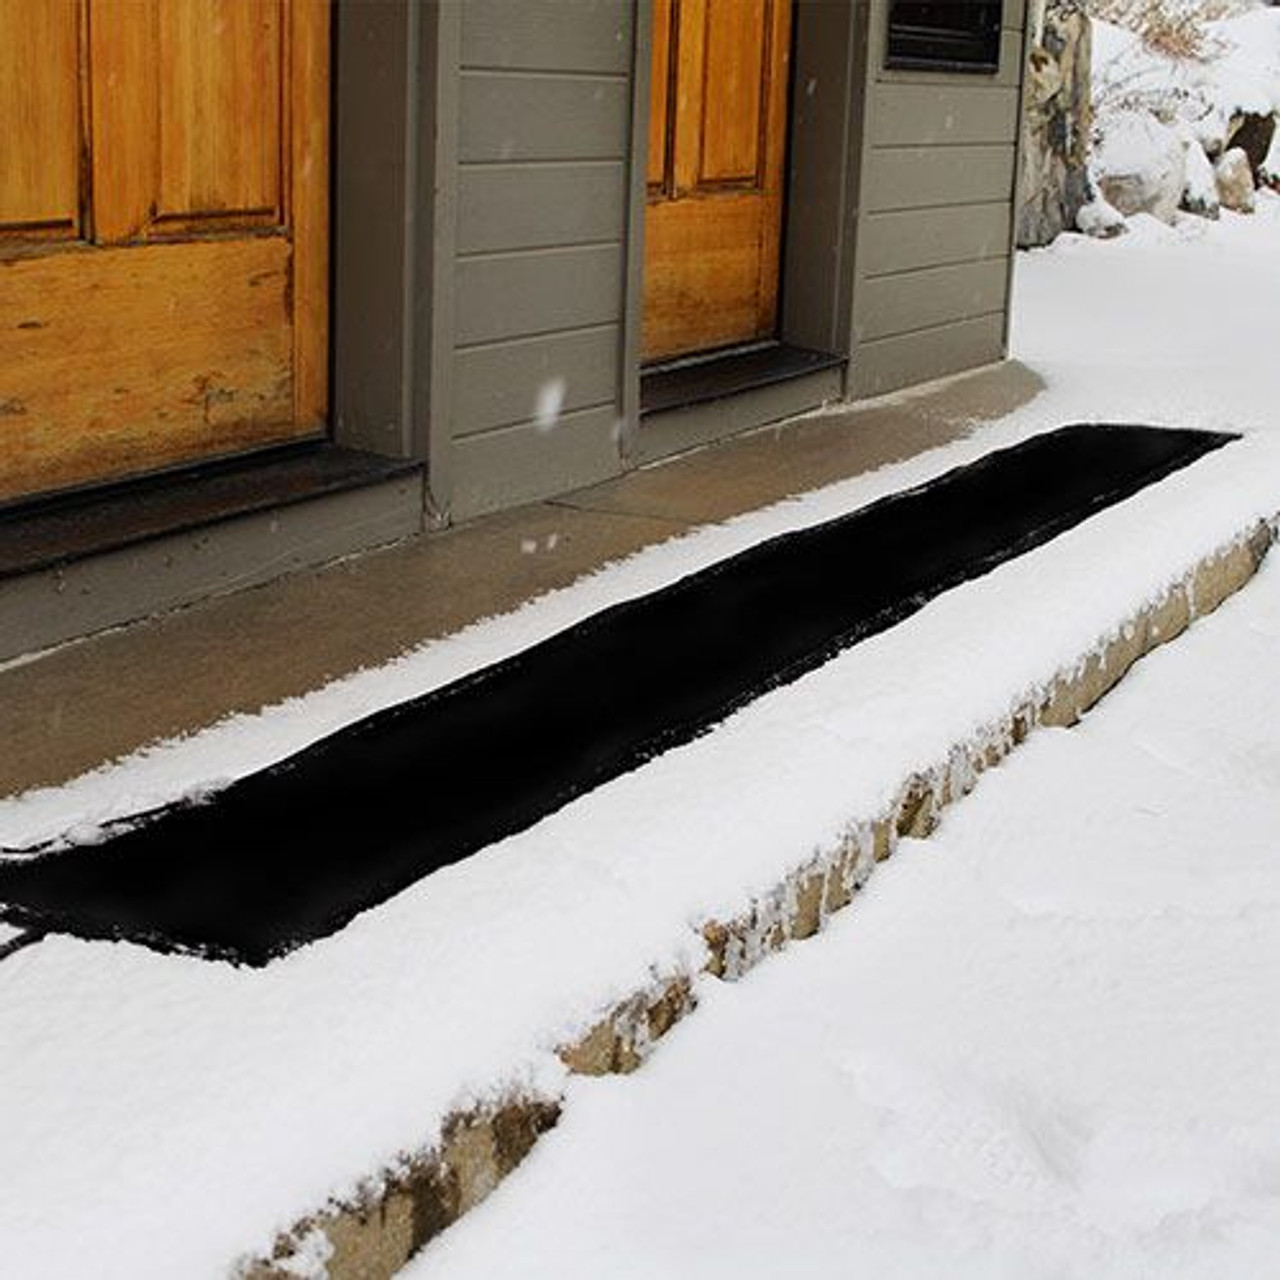 RESIDENTIAL HEATED WALKWAY MAT, CONNECTABLE, 12 INCHES X 120 INCHES